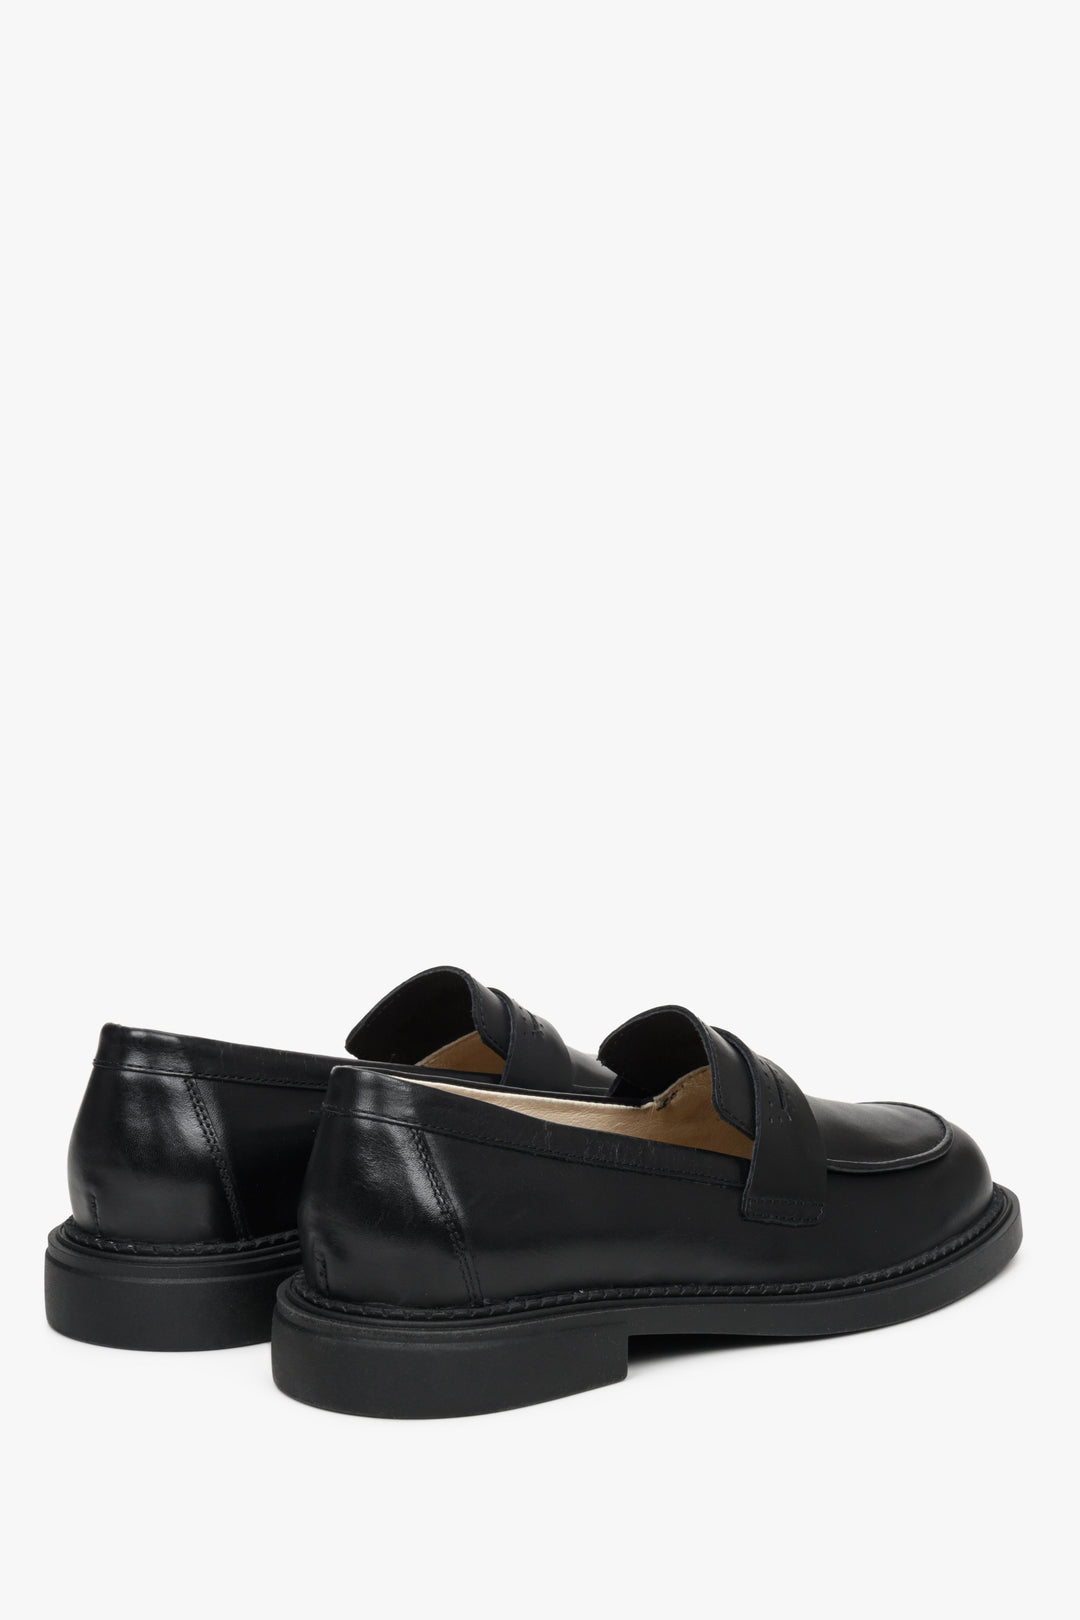 Women's leather loafers in black Estro - a close-up of the heel.